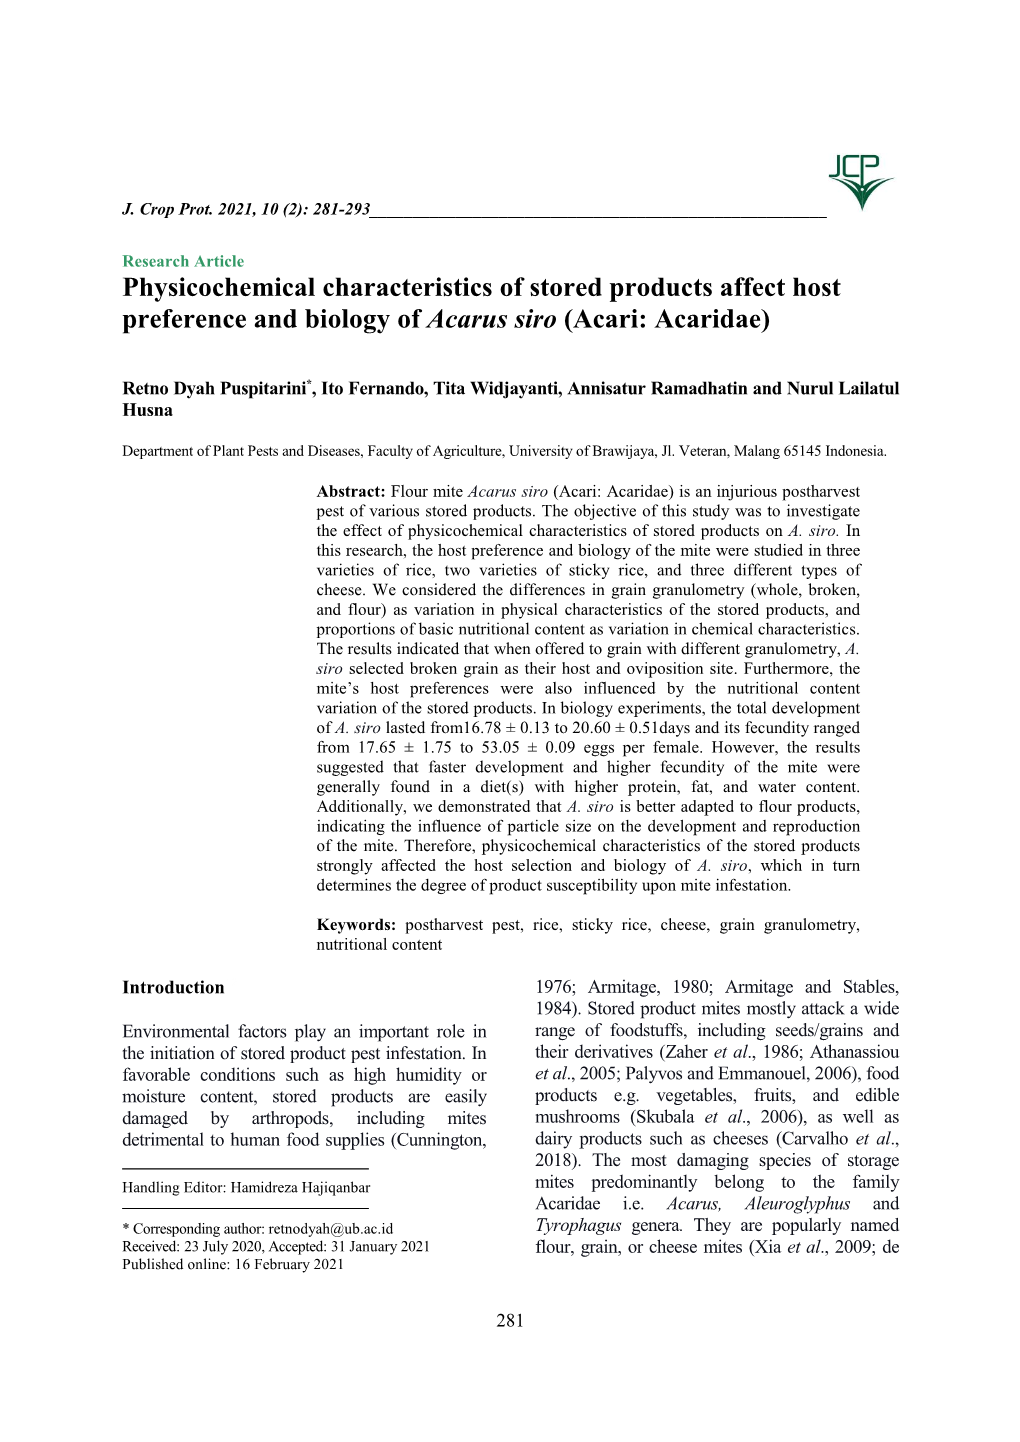 Physicochemical Characteristics of Stored Products Affect Host Preference and Biology of Acarus Siro (Acari: Acaridae)